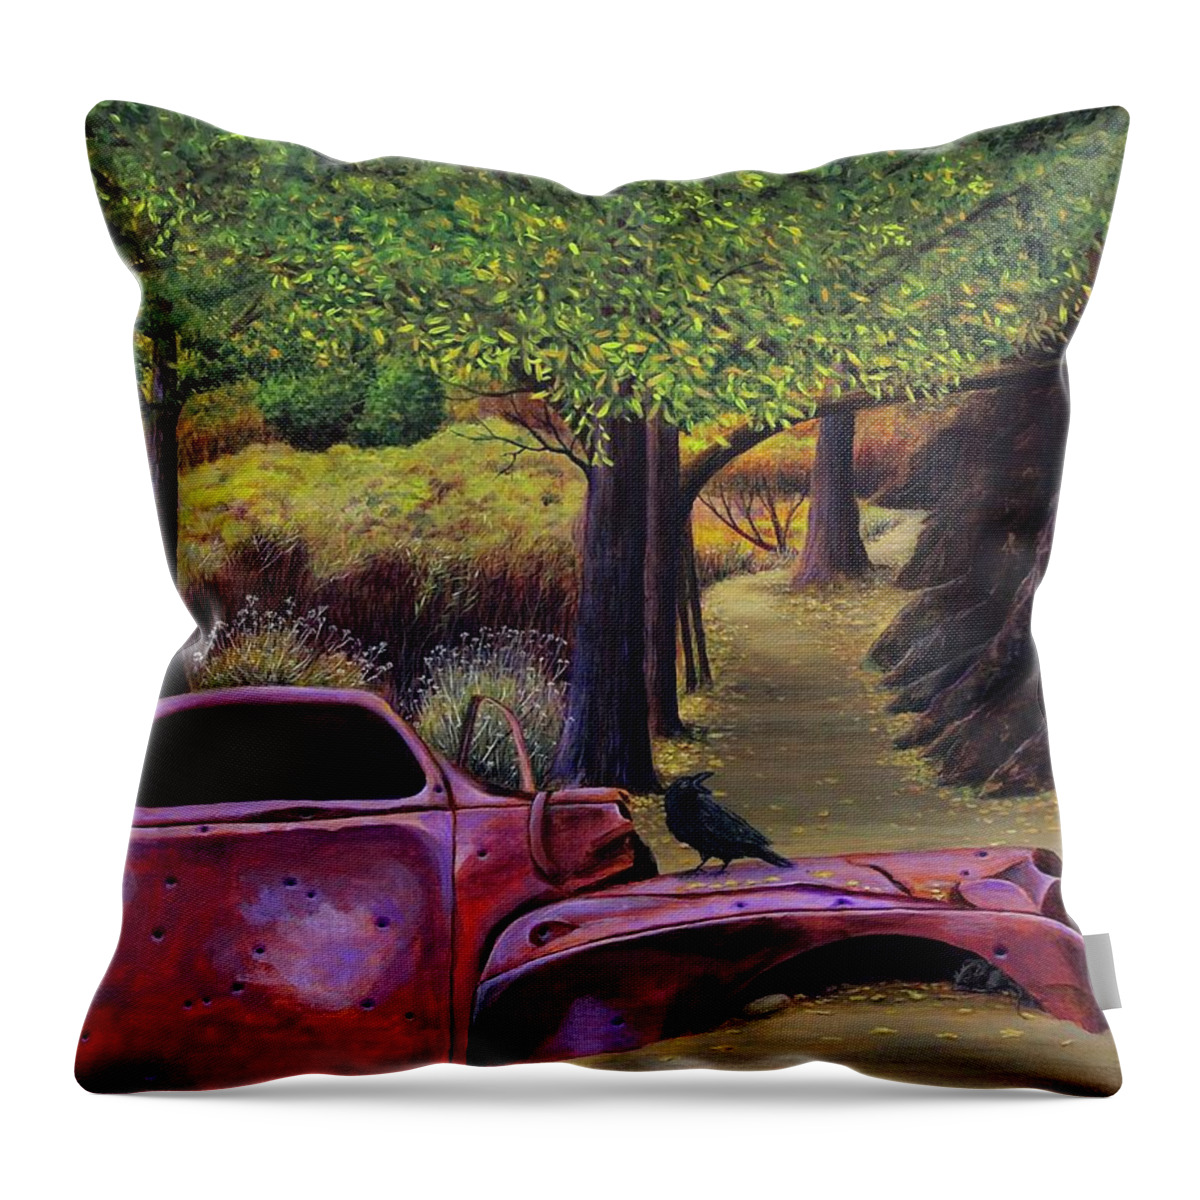 Kim Mcclinton Throw Pillow featuring the painting End of the Road by Kim McClinton